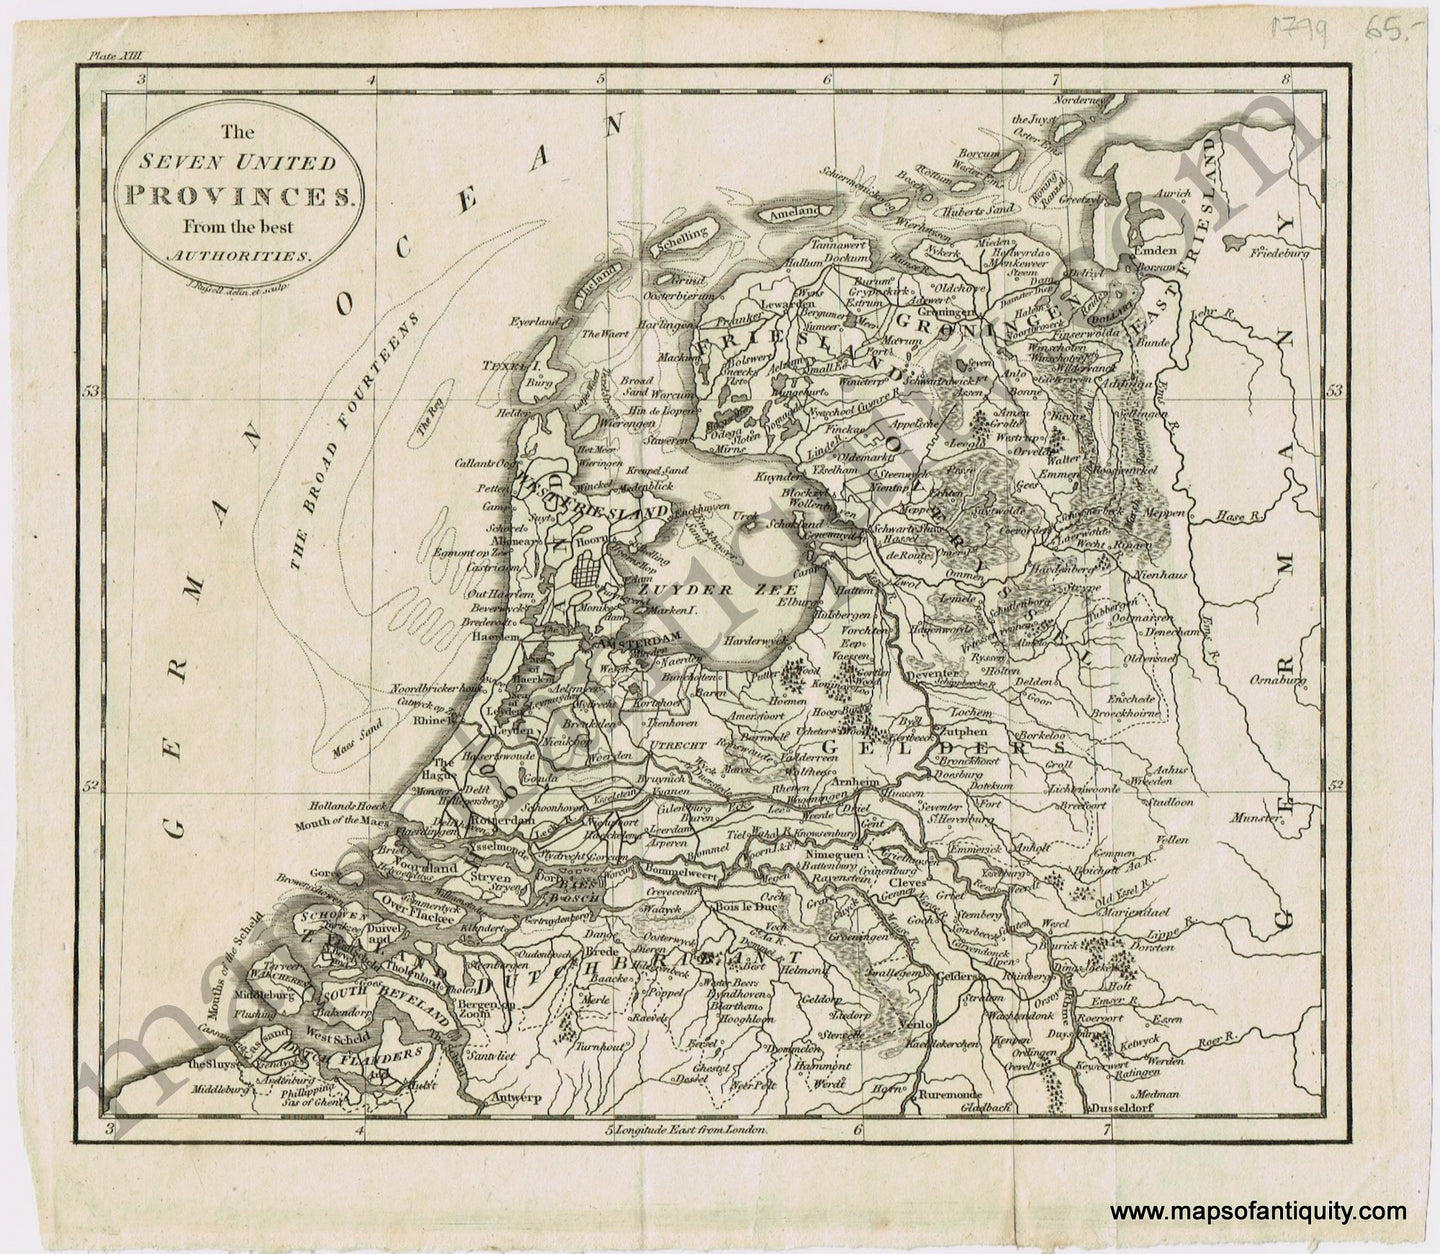 Antique-Map-Netherlands-The-Seven-United-Provinces-from-the-Best-Authorities-Russel-1799-1790s-1700s